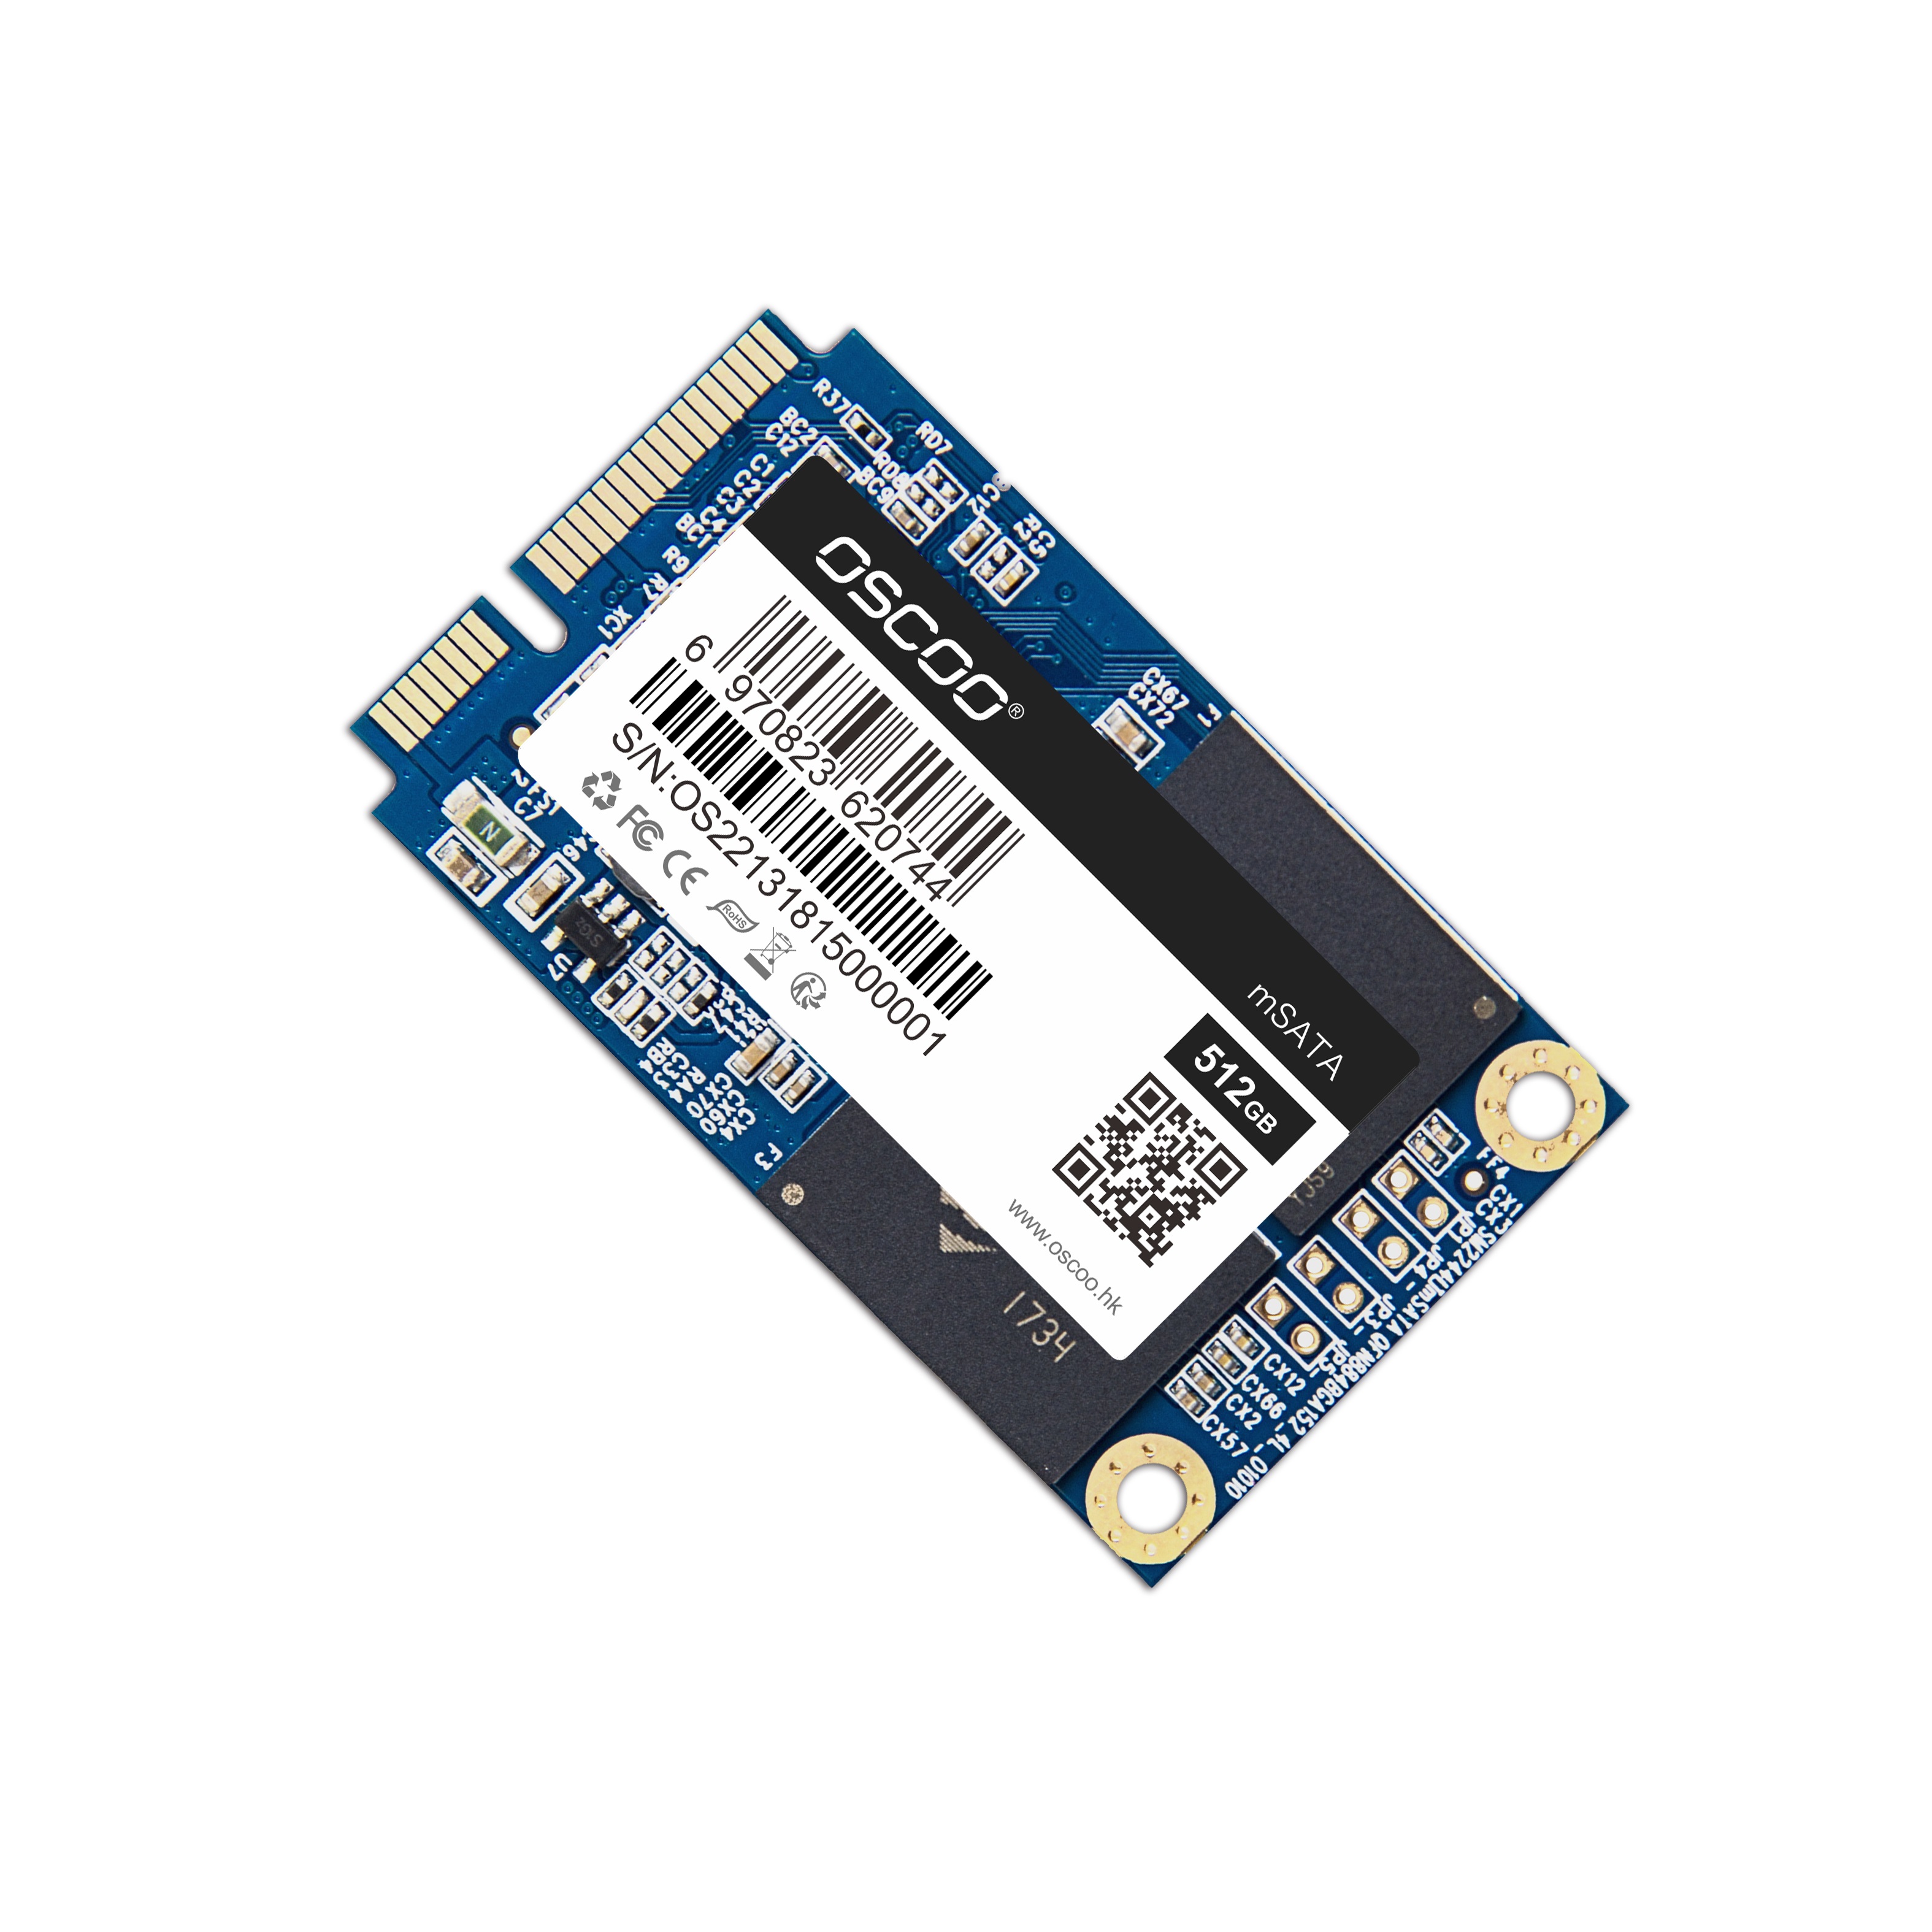 Find OSCOO mSATA SSD 64G/ 128G/ 256G/ 512G Hard Drive MLC NAND Flash For Laptop Desktop Computer Mini PC for Sale on Gipsybee.com with cryptocurrencies